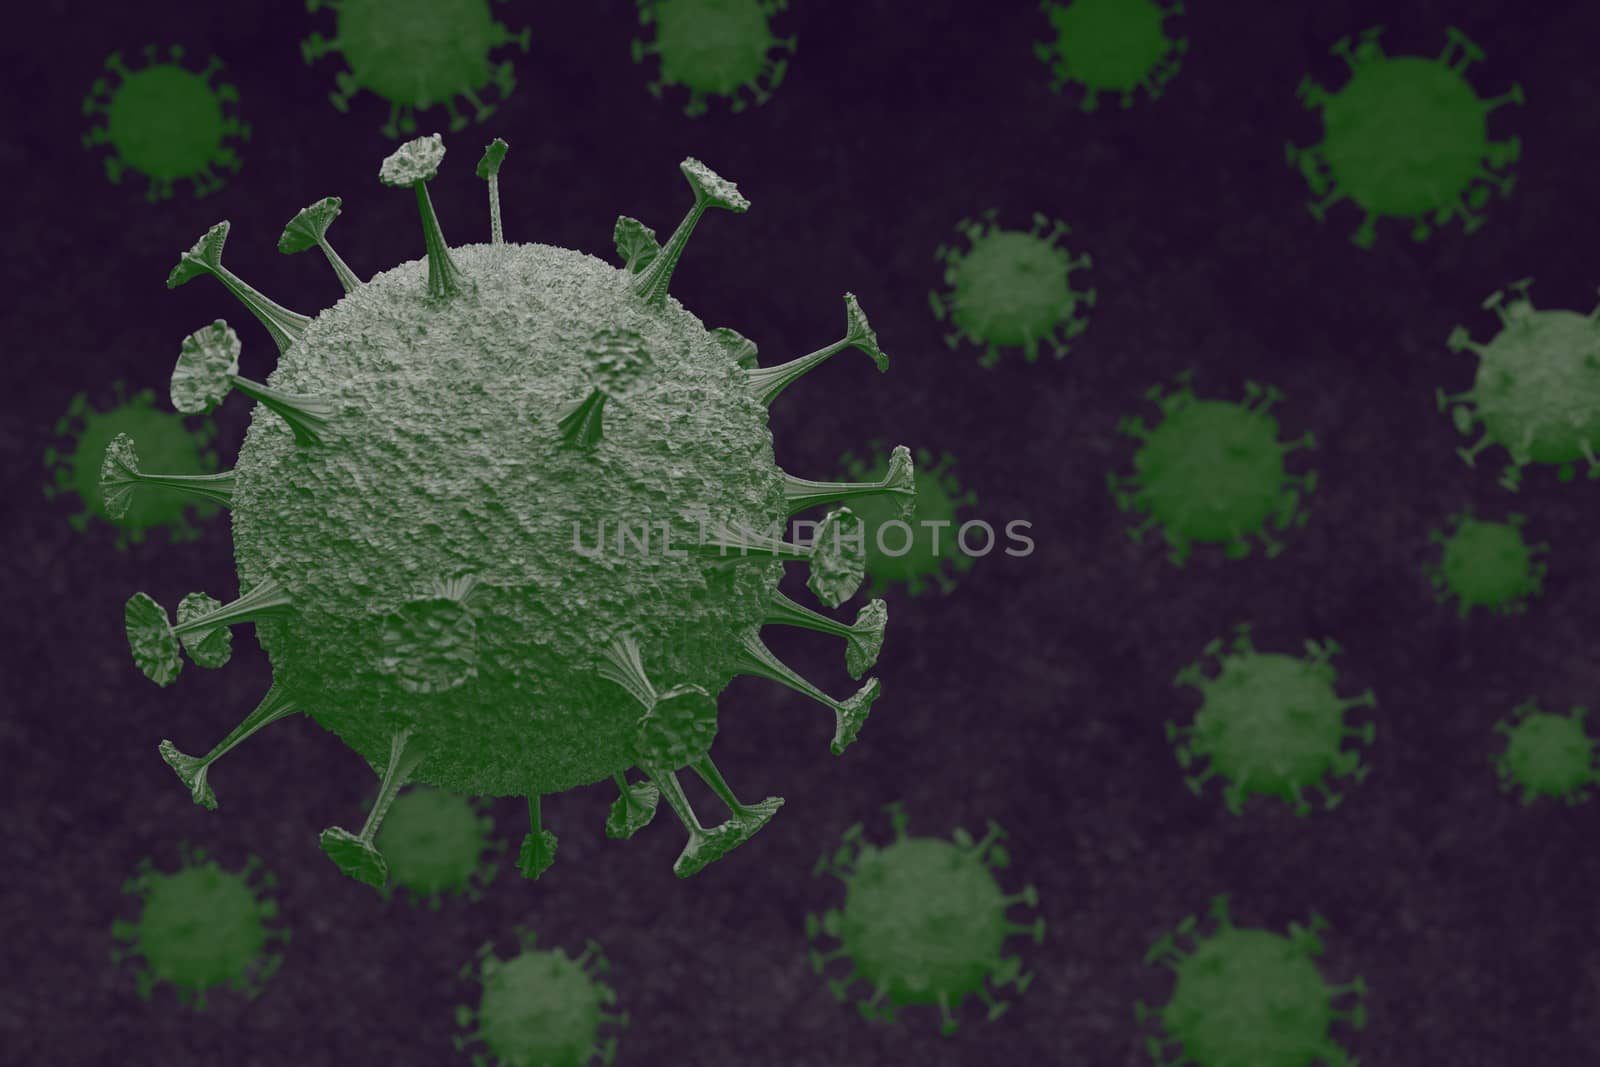 Coronavirus cells in human body. Respiratory virus in microscopic view. illustration of 3D render. Closeup and copy space. Concept of health care.